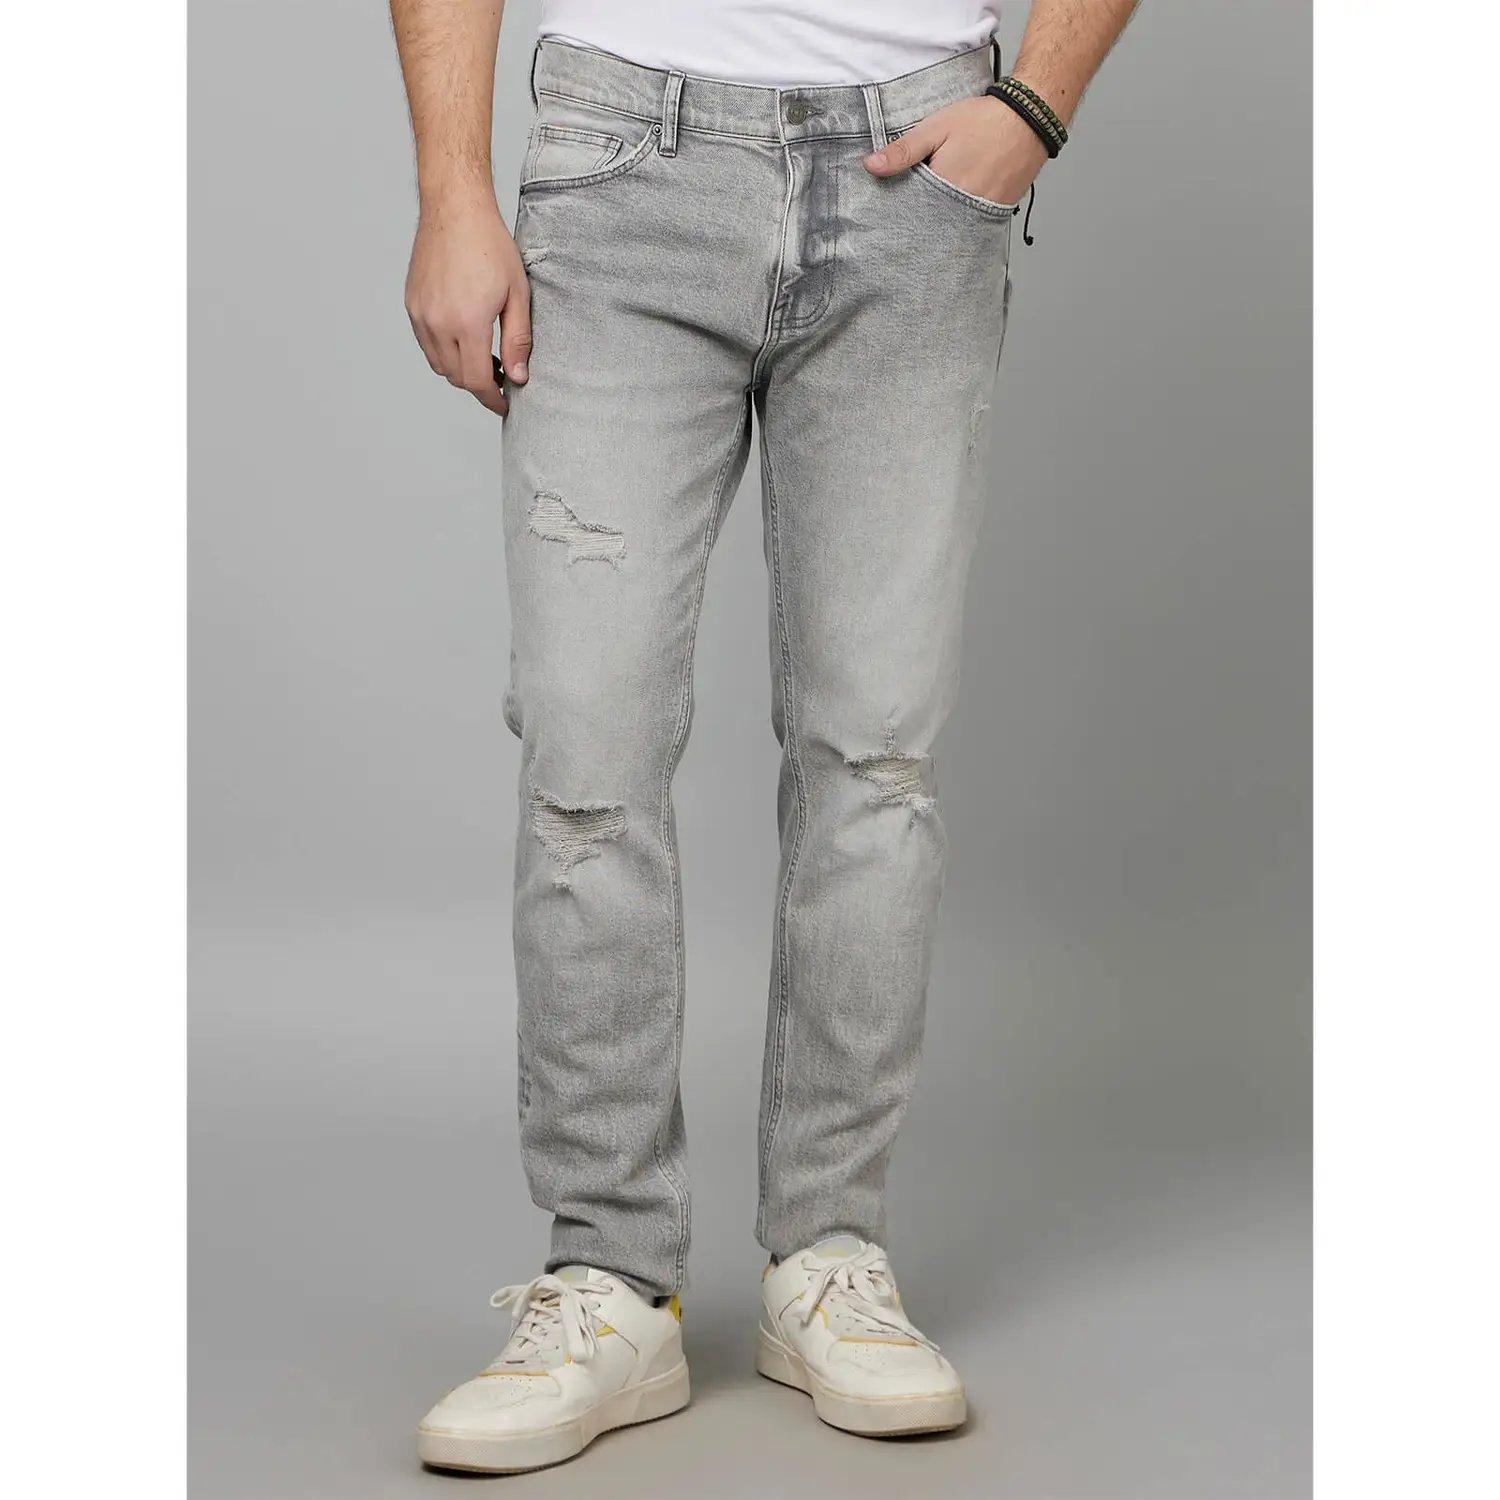 Grey Slim Fit Mildly Distressed Heavy Fade Stretchable Cotton Jeans